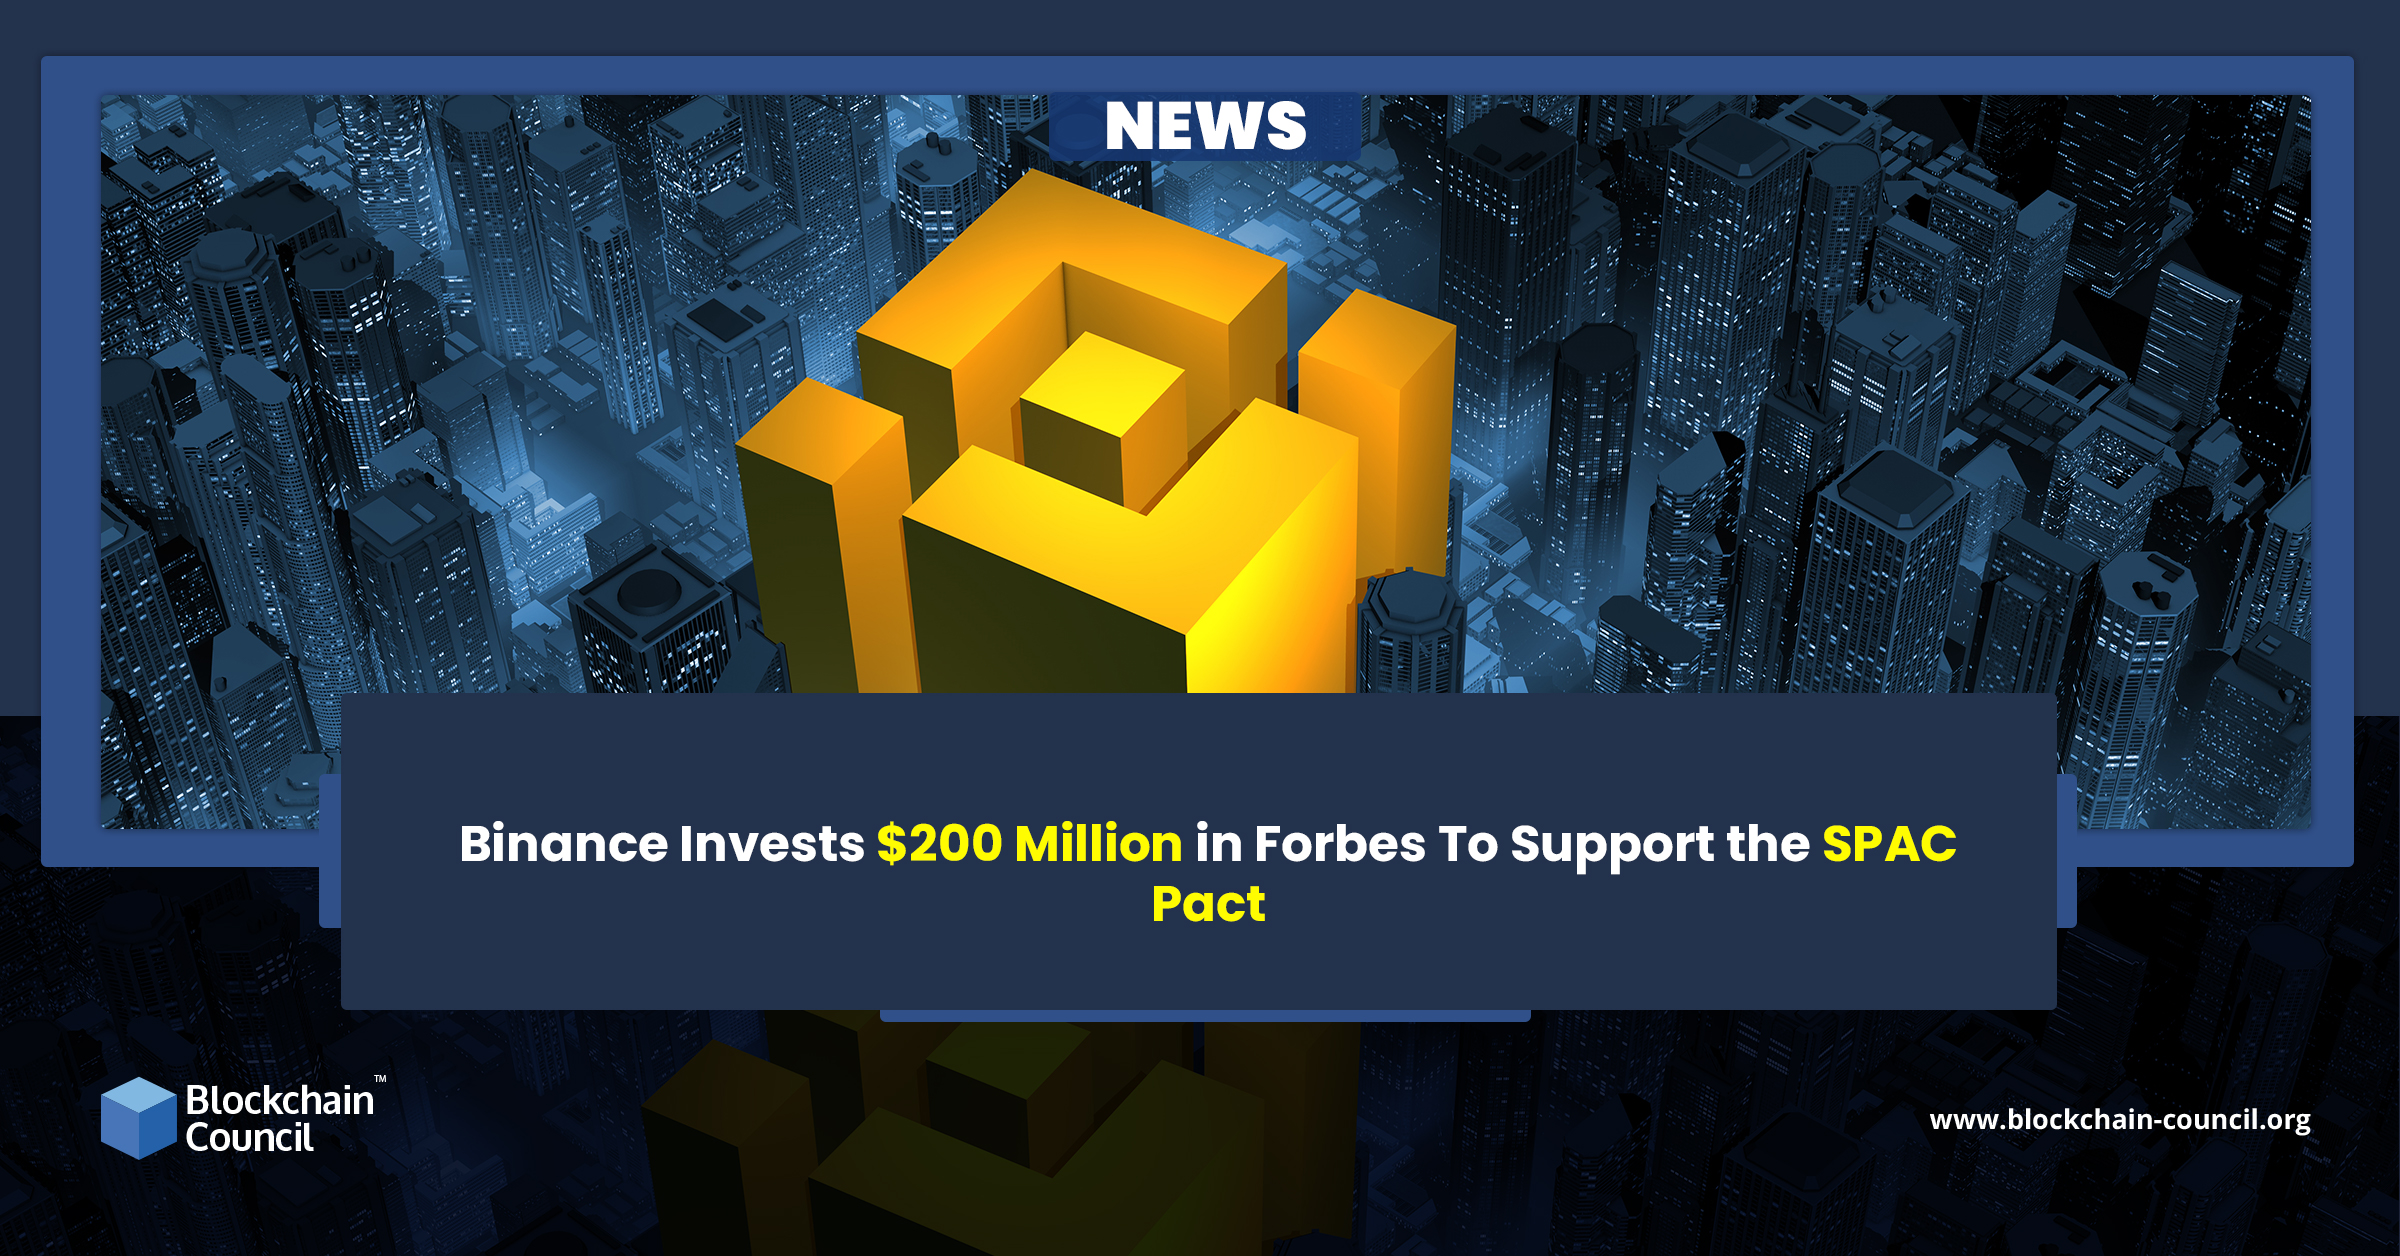 Binance Invests $200 Million in Forbes To Support the SPAC Pact